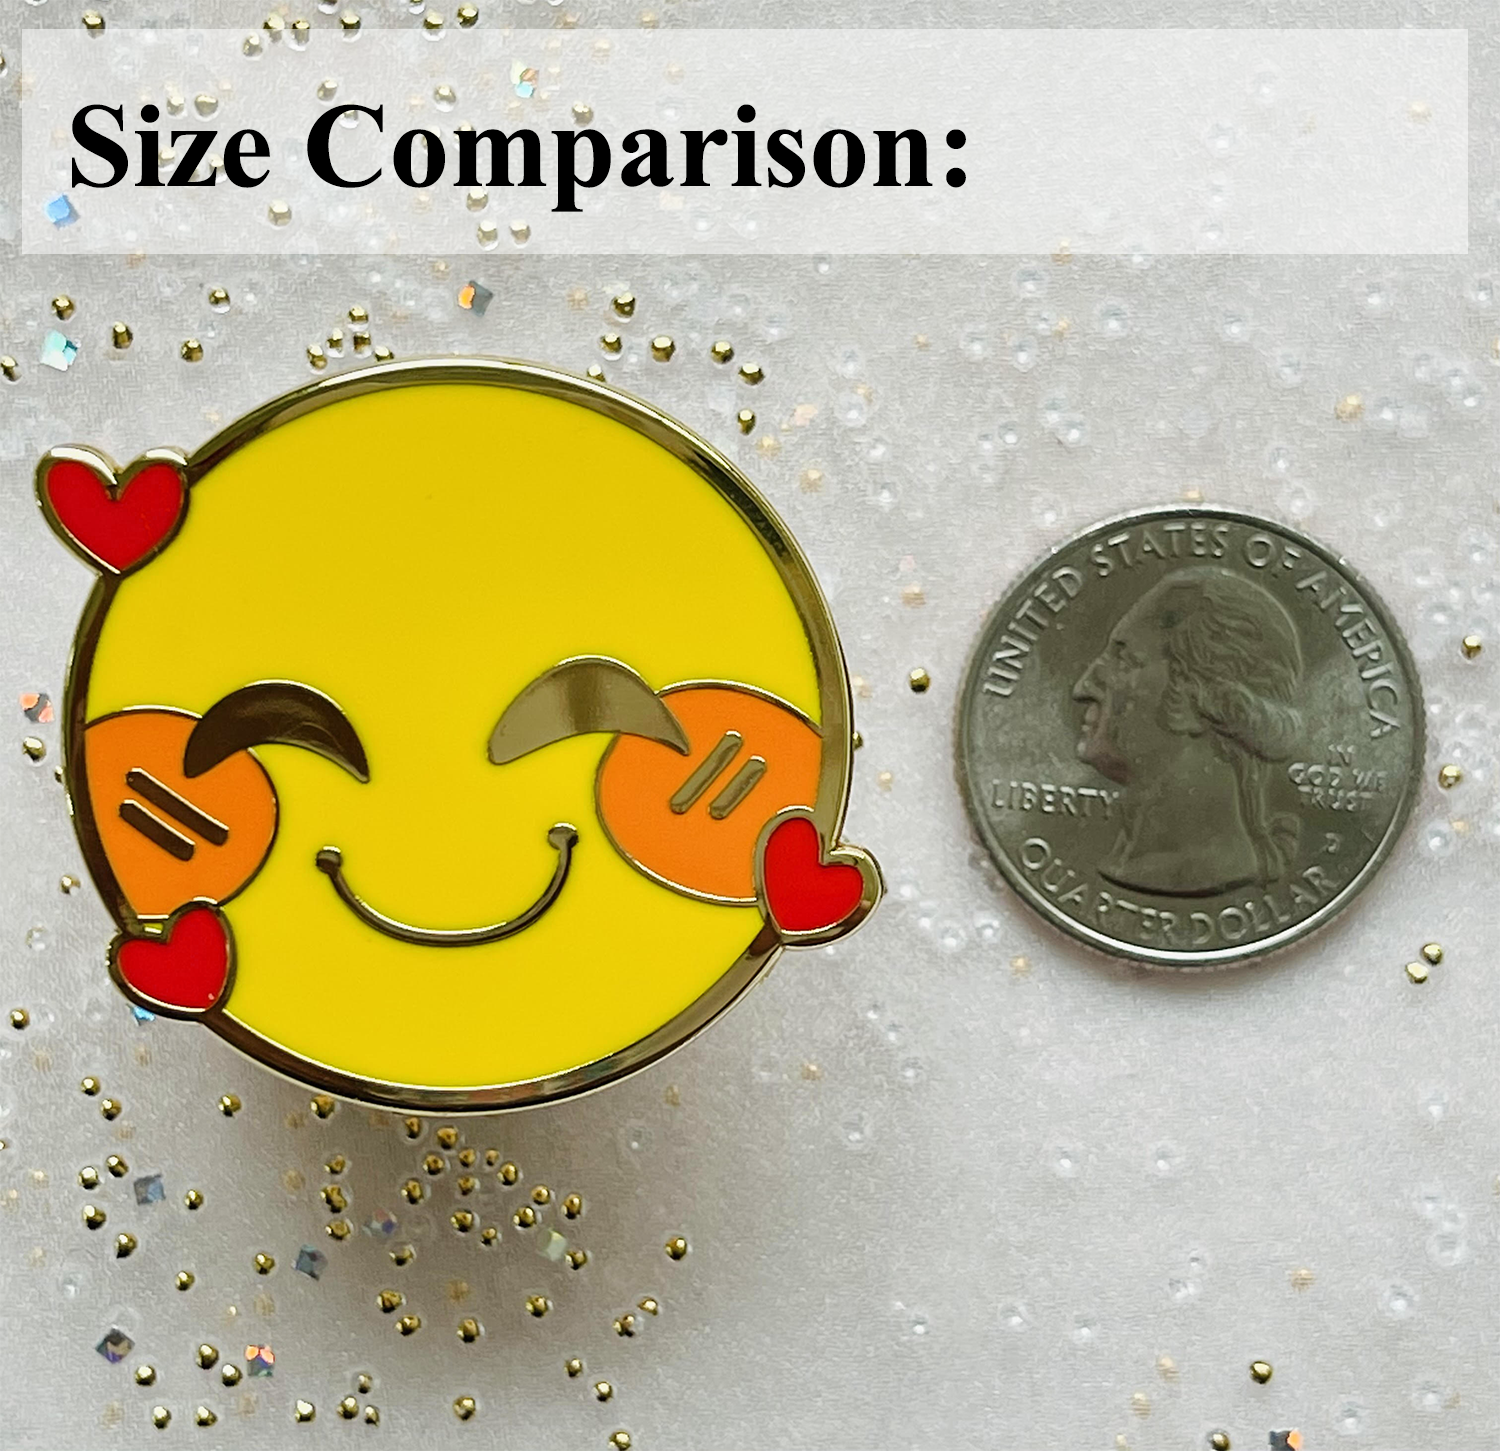 An enamel pin shown next to a quarter as a size comparison. It is 1.5 times the size of the quarter.